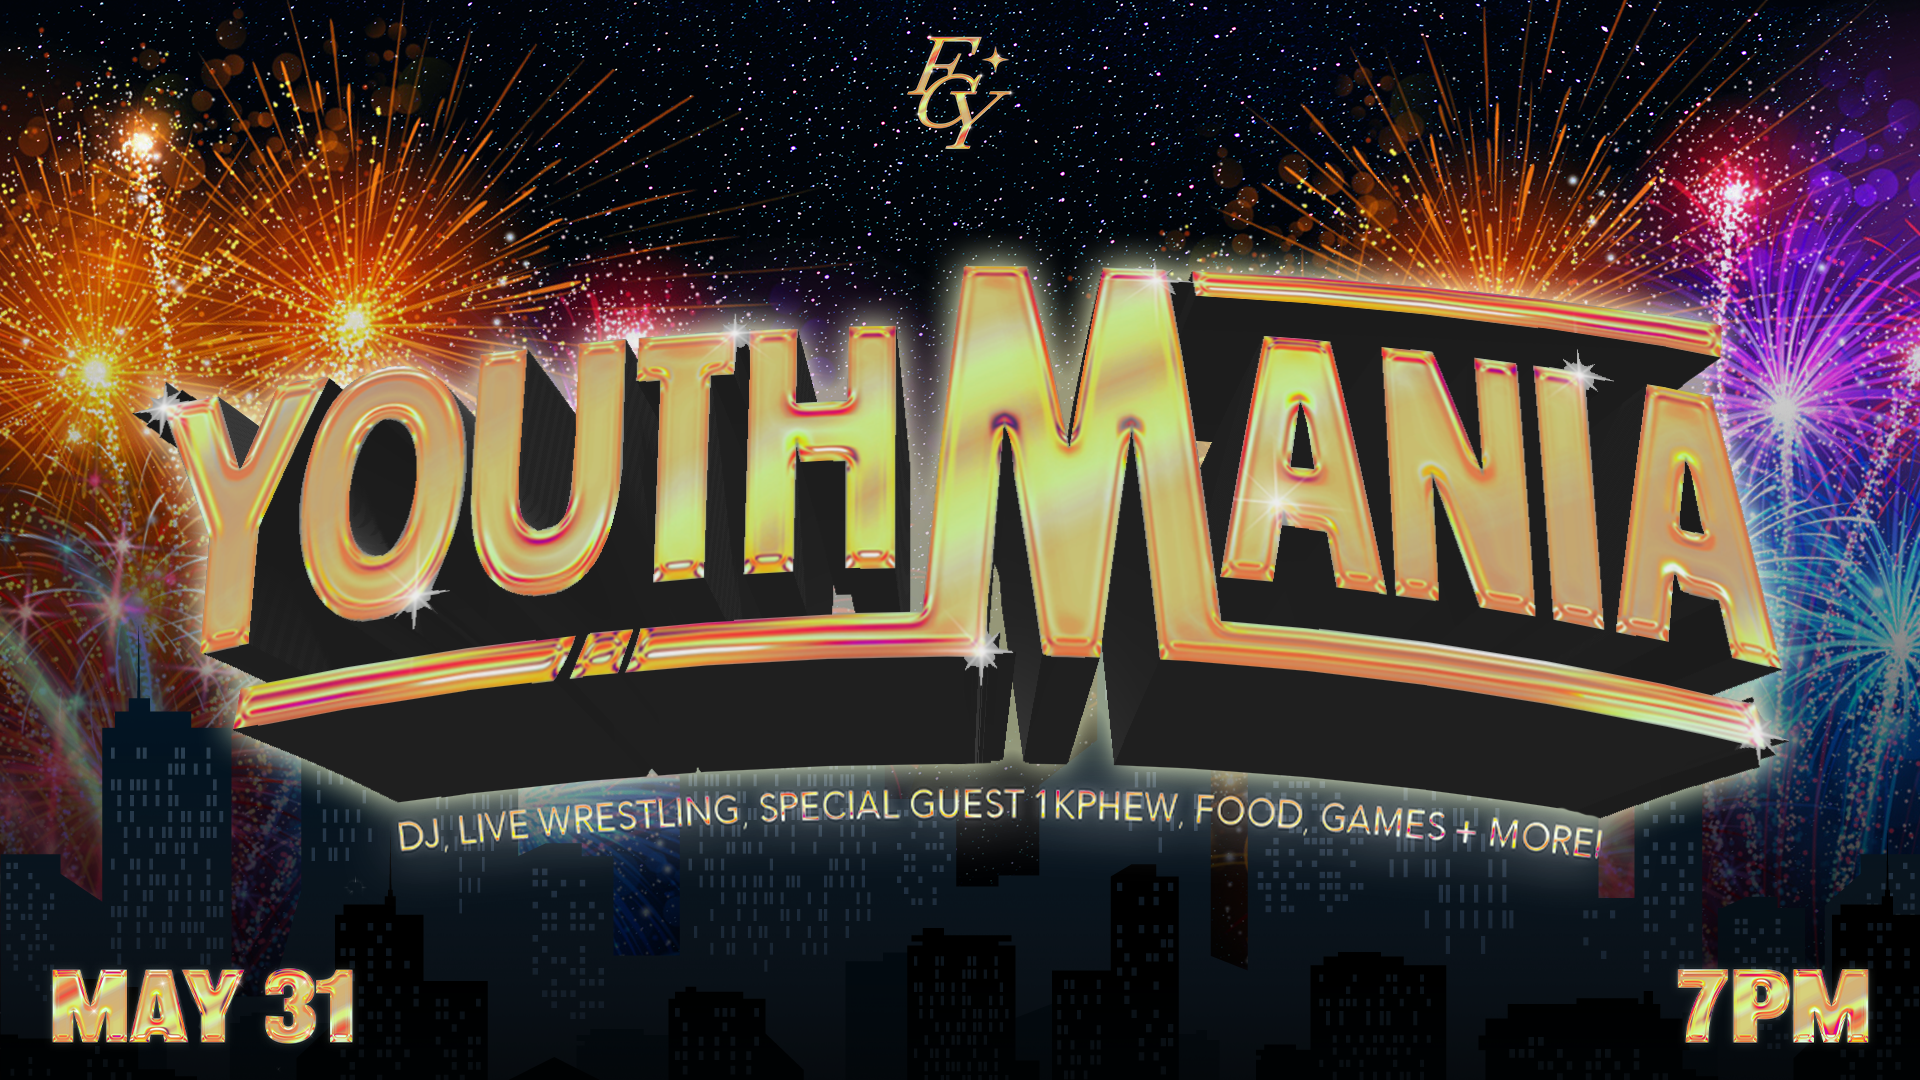 FCY United Night: YOUTHMANIA at the Gainesville campus